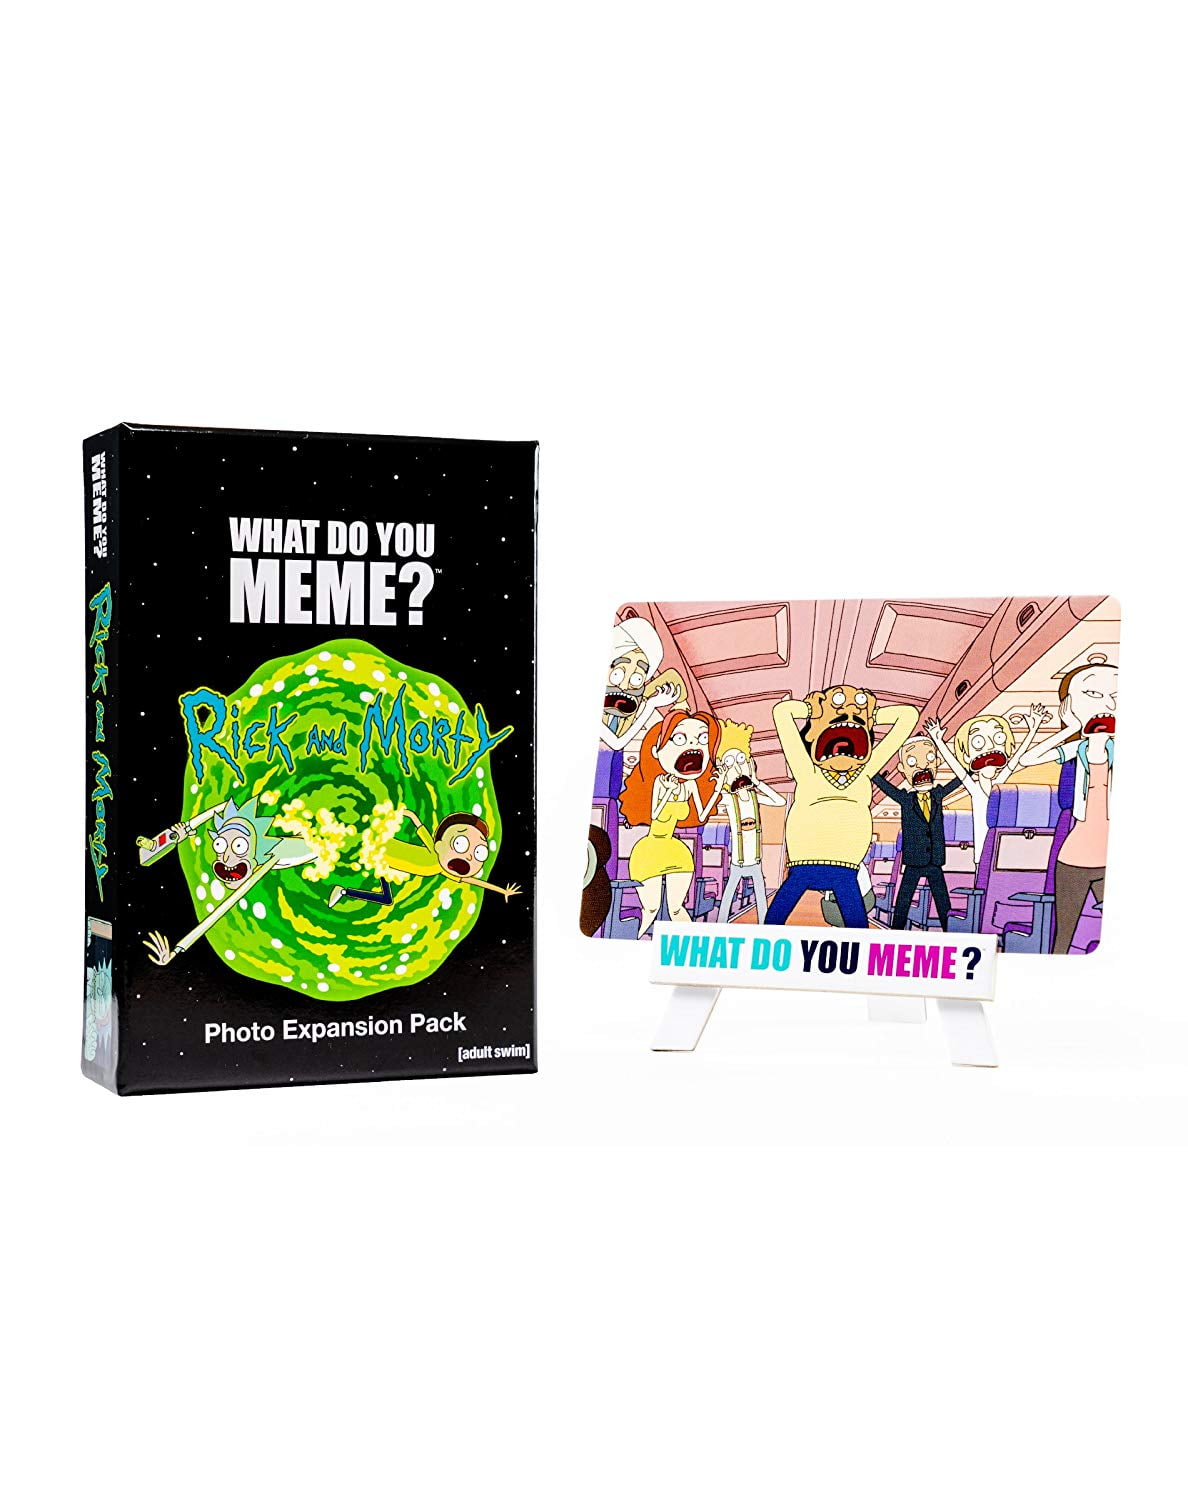 WHAT DO YOU MEME Rick and Morty Expansion Pack 75 photo cards New Sealed 